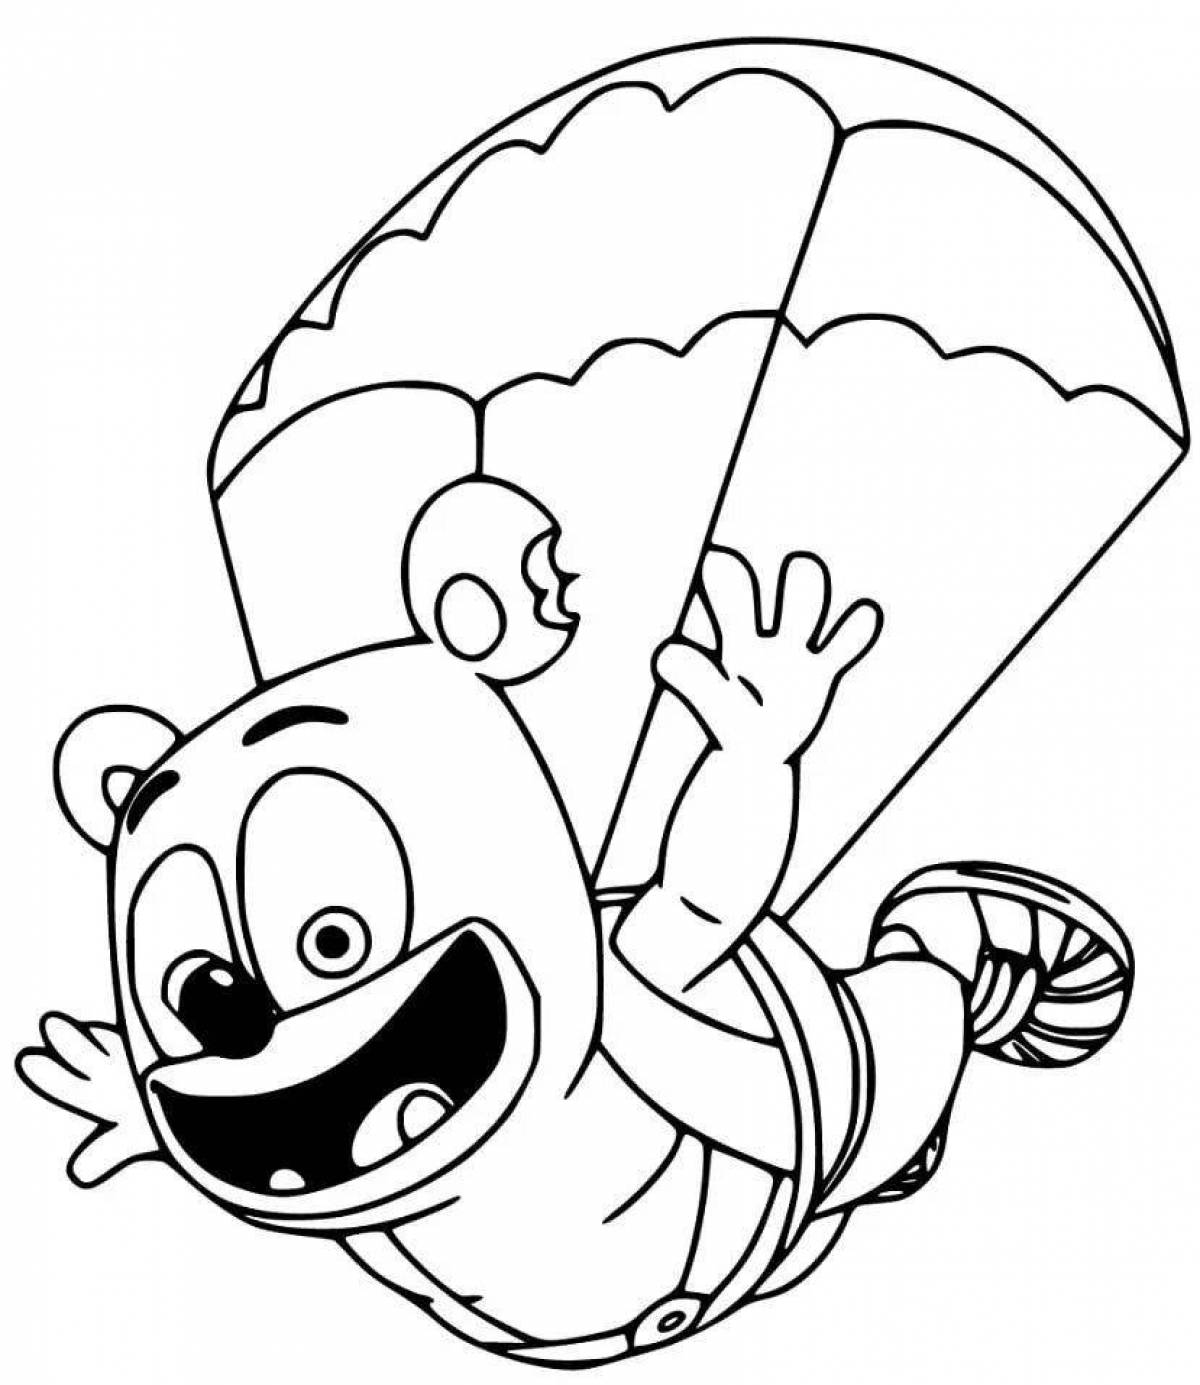 Playful humber coloring page